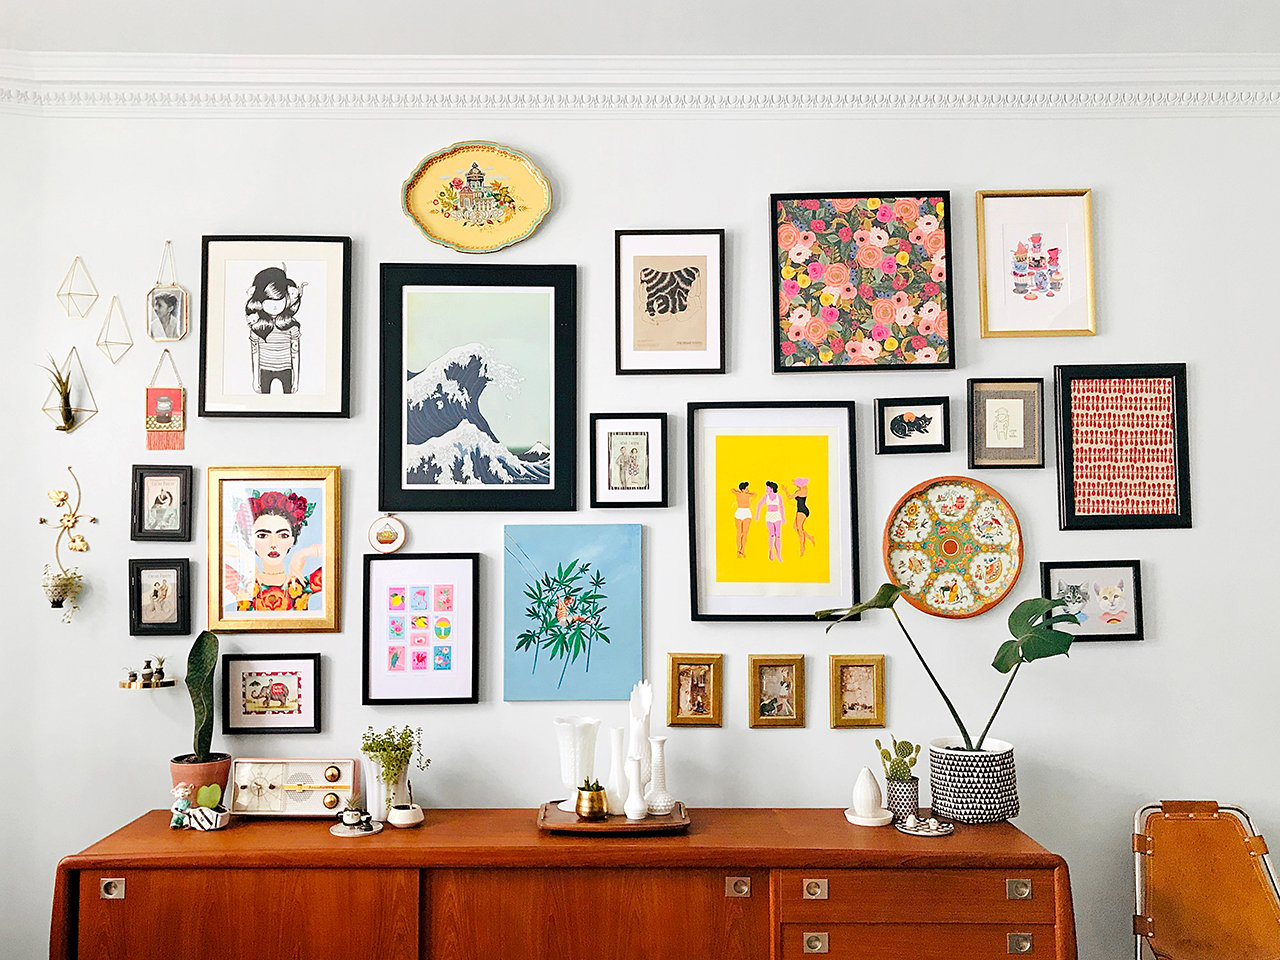 gallery wall- an assortment of art and objects hang on a wall above a sideboard